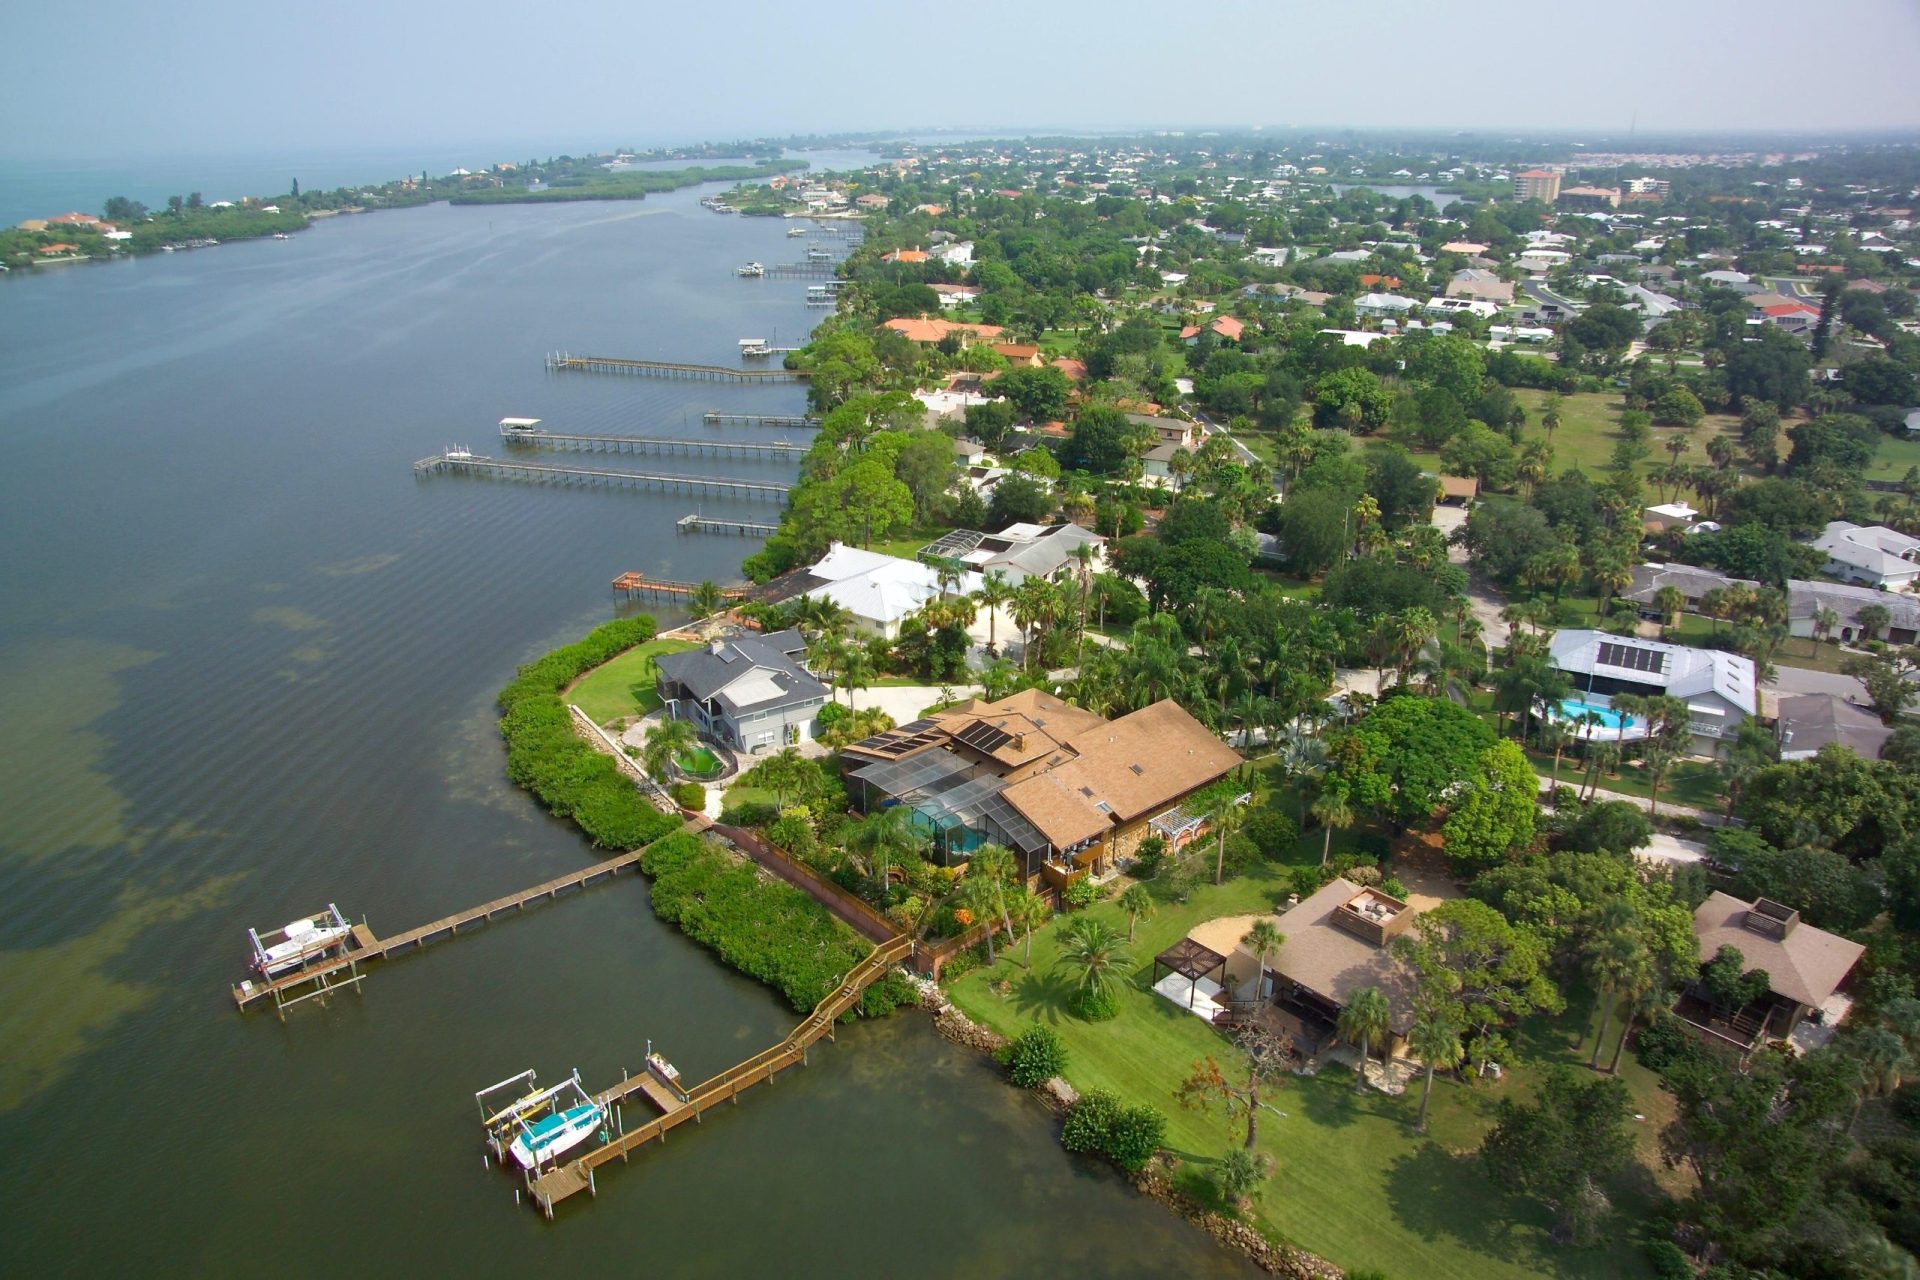 Scenic Overhead View of Osprey, FL - Serene Waterfront Community with Residential Houses, Boat Docks, and Natural Beauty